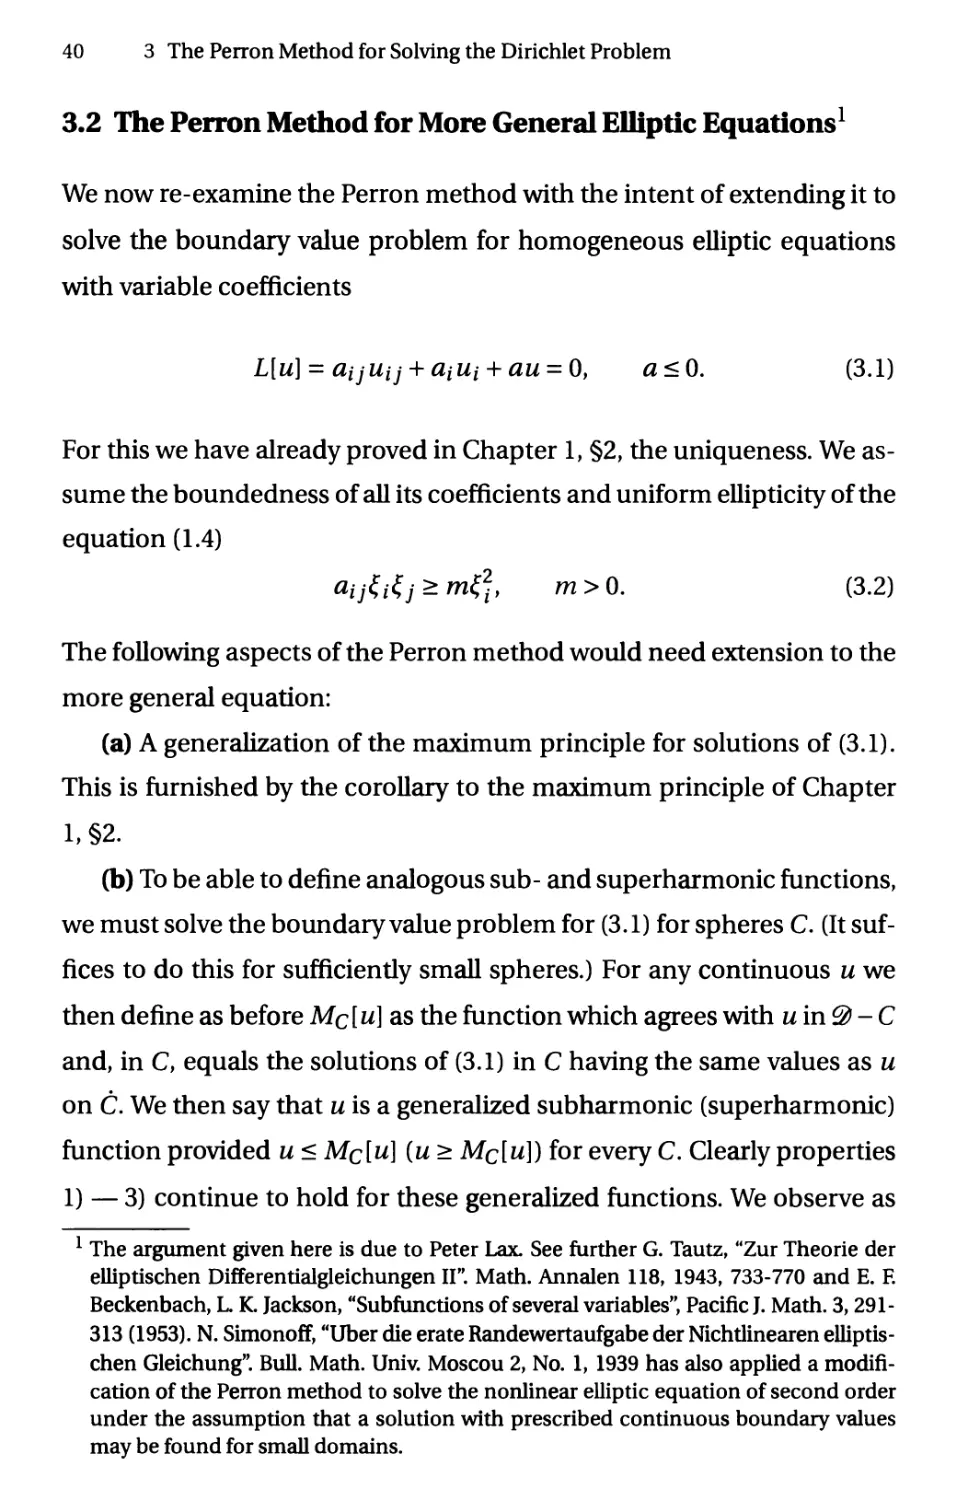 3.2 The Perron Method for More General Elliptic Equations